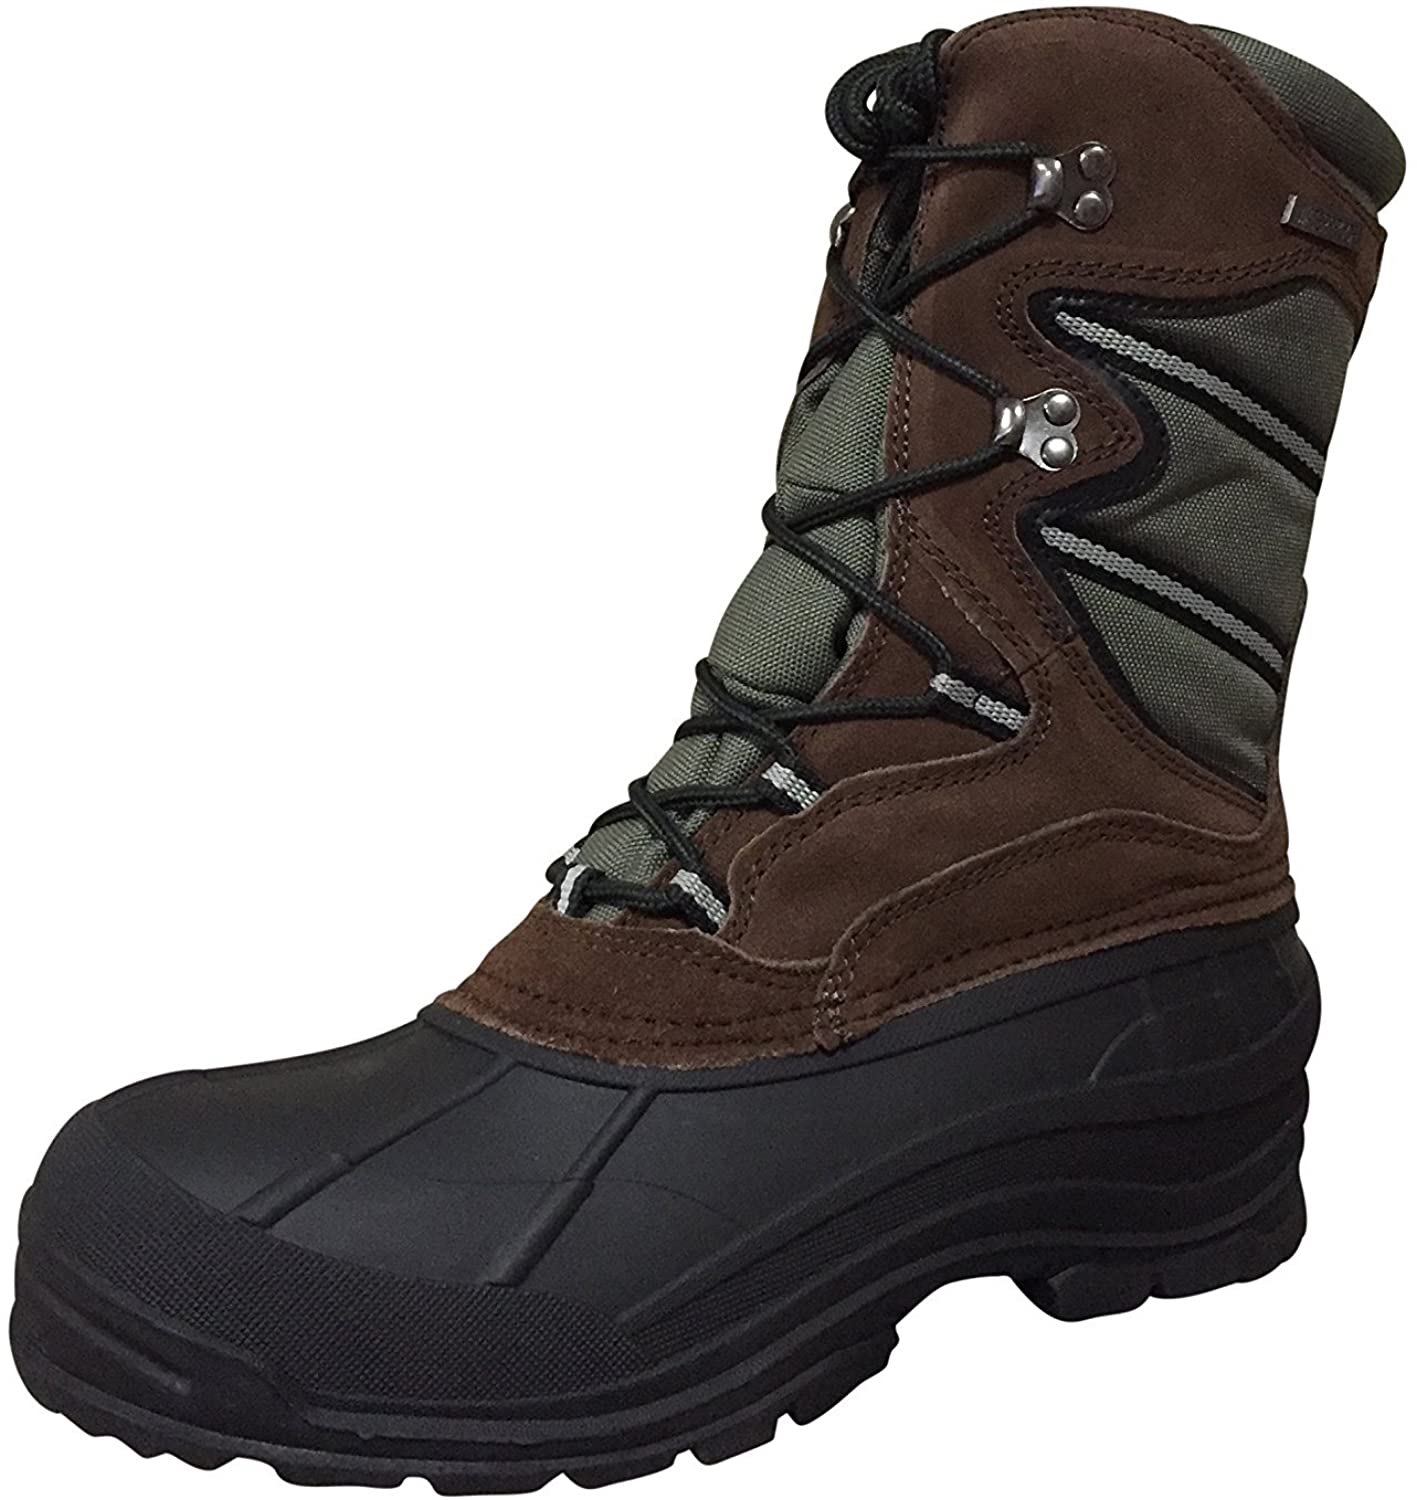 Men's Winter Boots 10" Hiking Leather Nylon Thinsulate Hunting Snow Boots - image 1 of 5